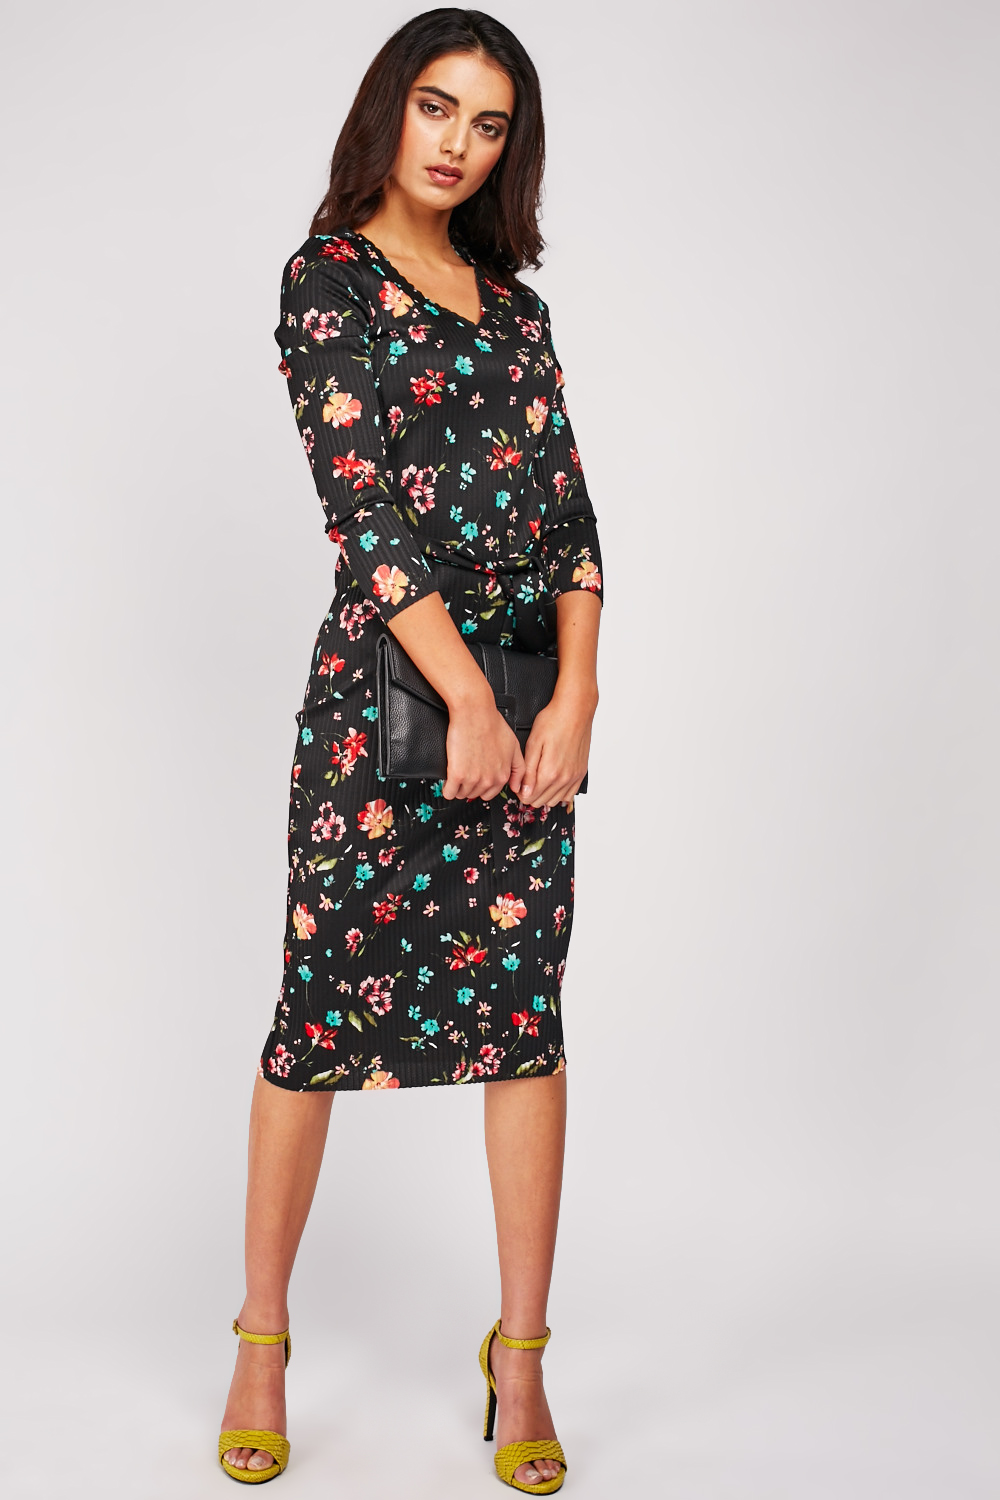 Ribbed Floral Bodycon Dress Just 7